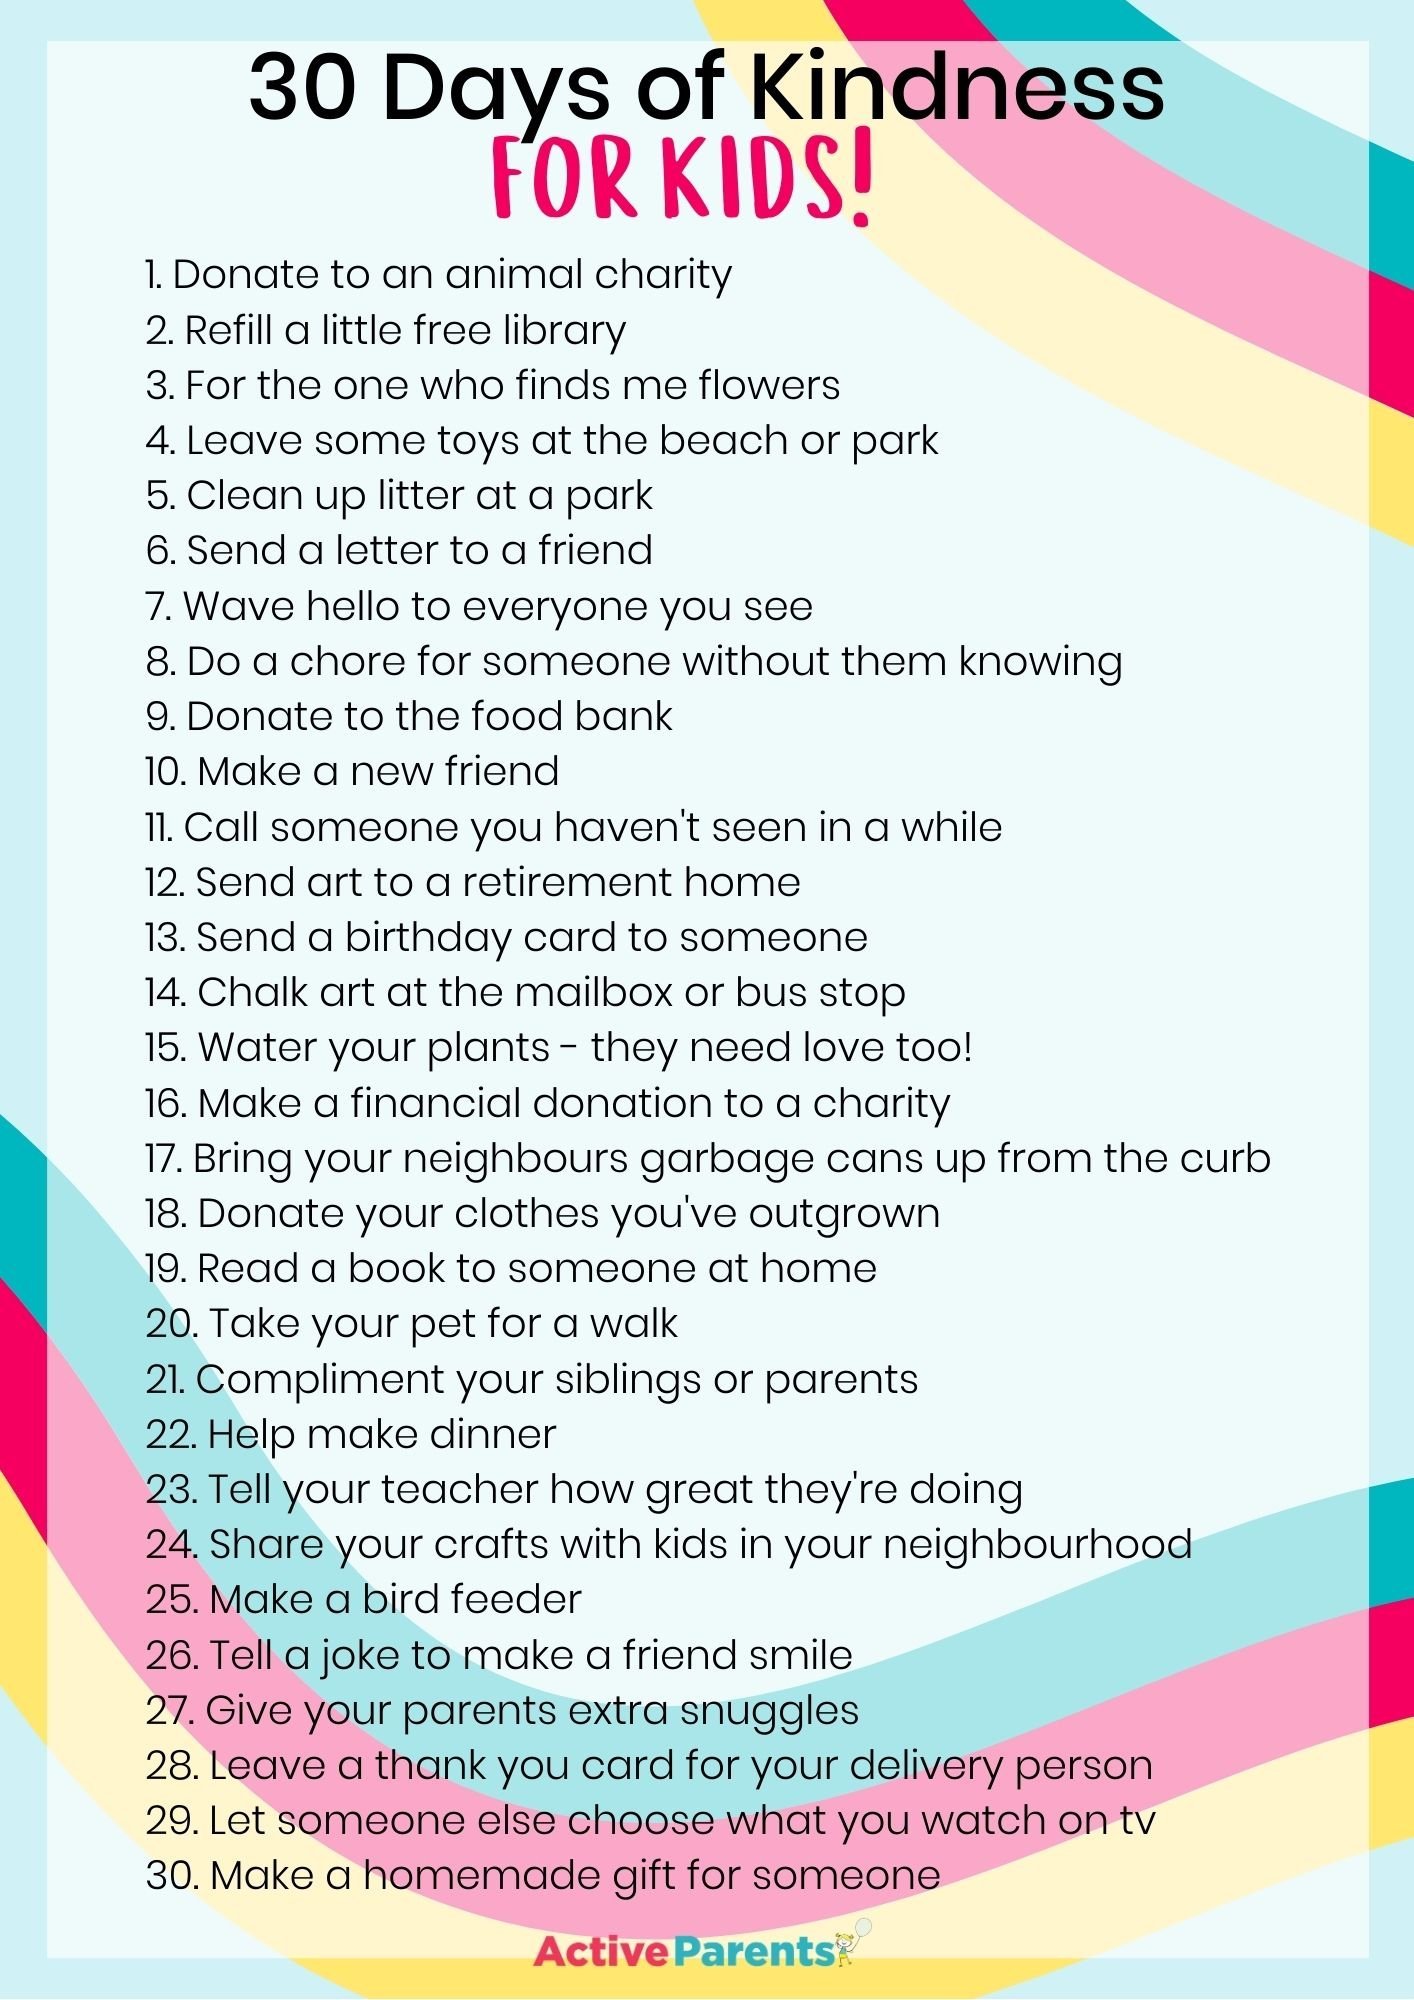 30-easy-acts-of-kindness-for-kids-active-parents